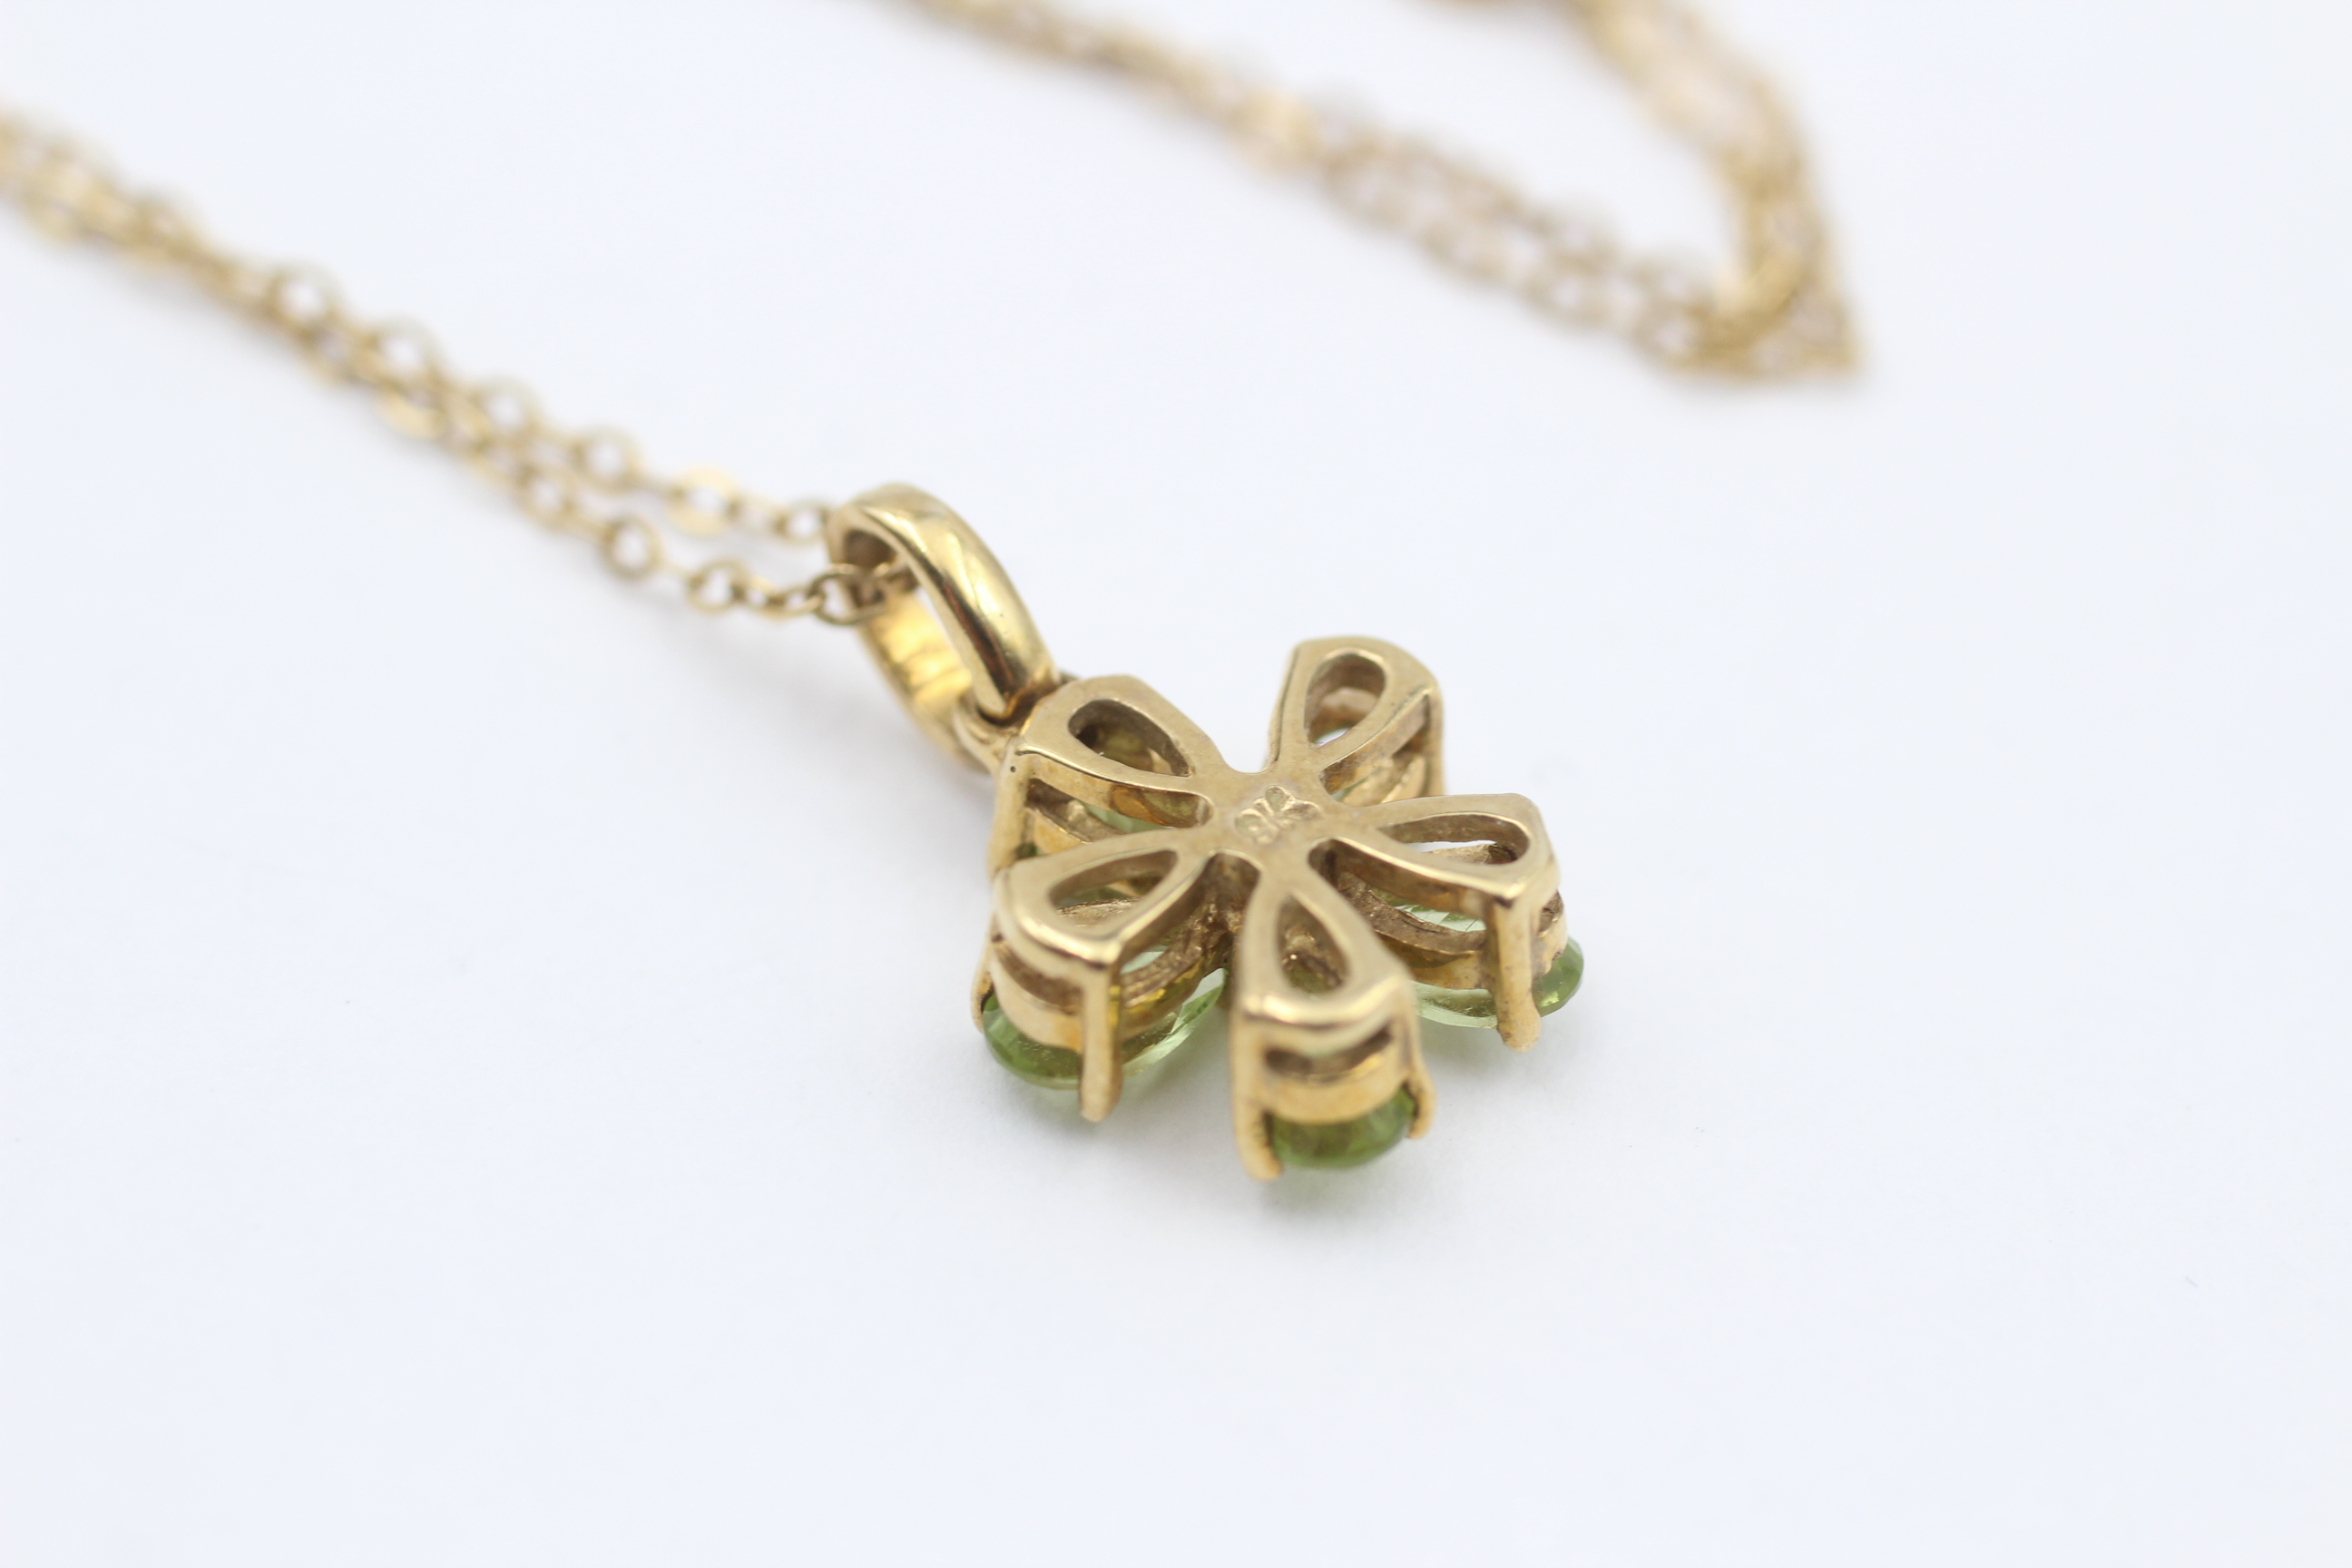 9ct Gold Green Gemstone Floral Pendant Necklace - Image 4 of 5